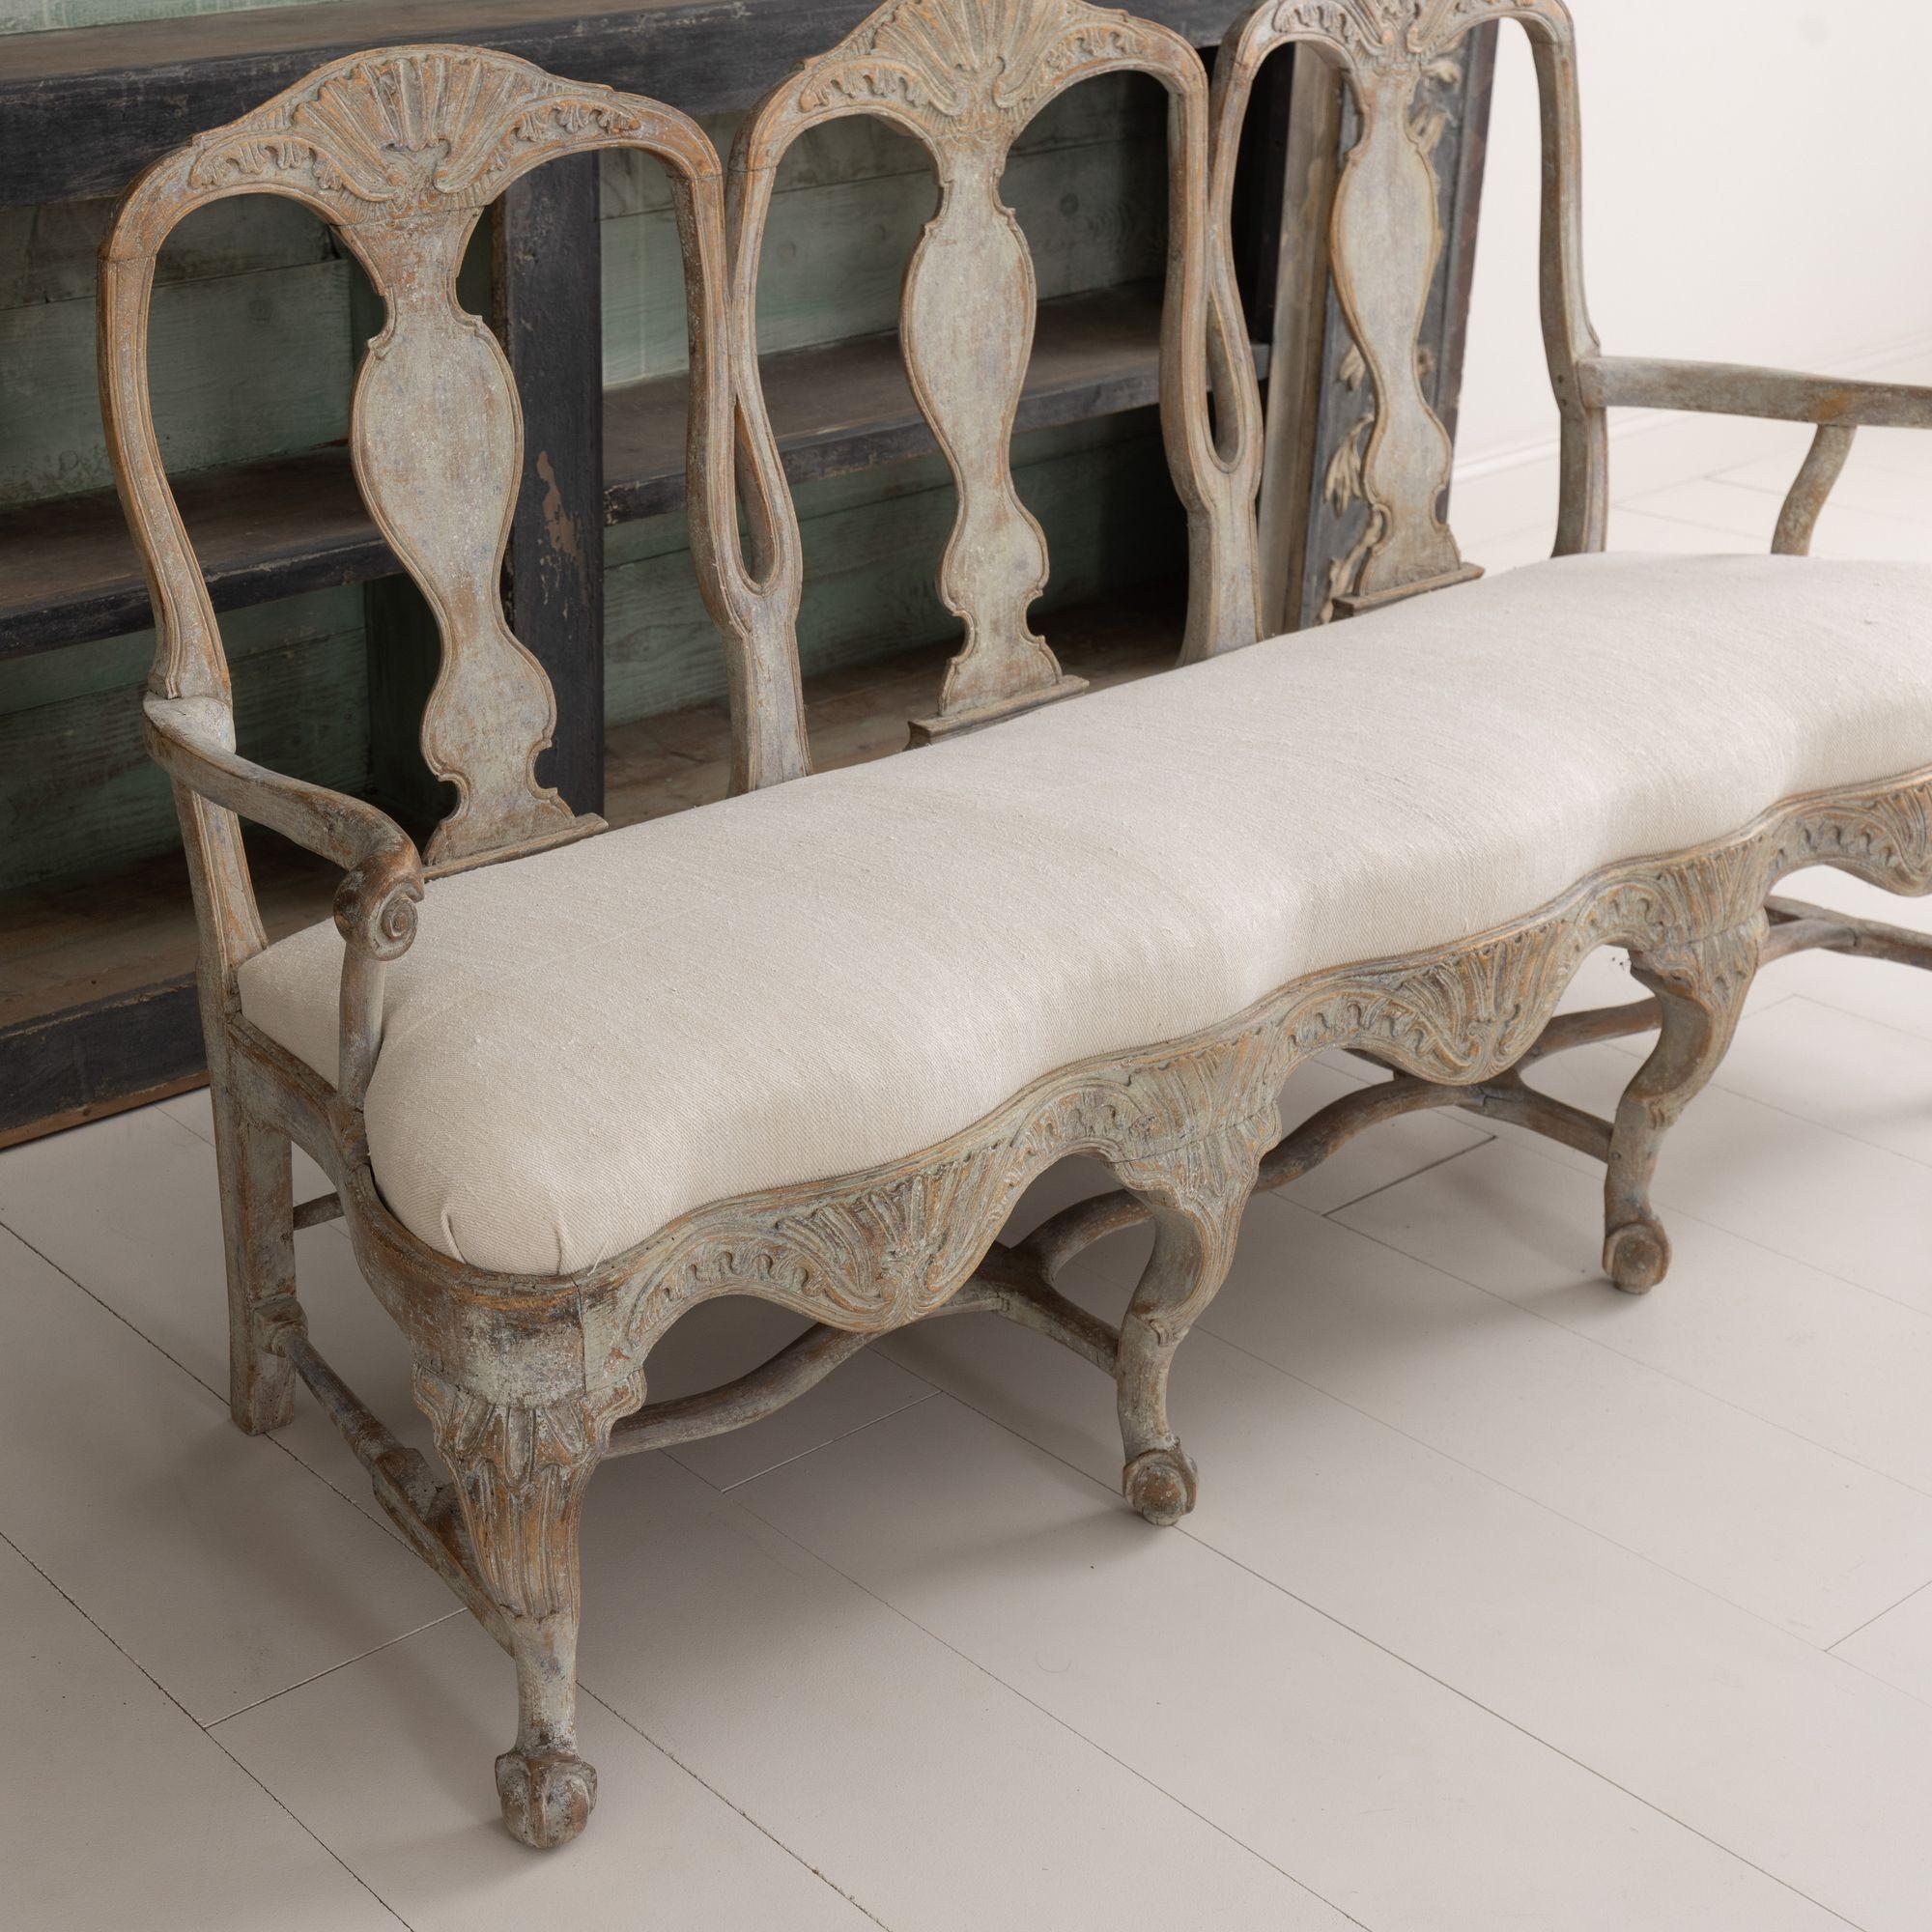 18th Century Swedish Rococo Period Settee or Sofa Bench in Original Paint For Sale 14